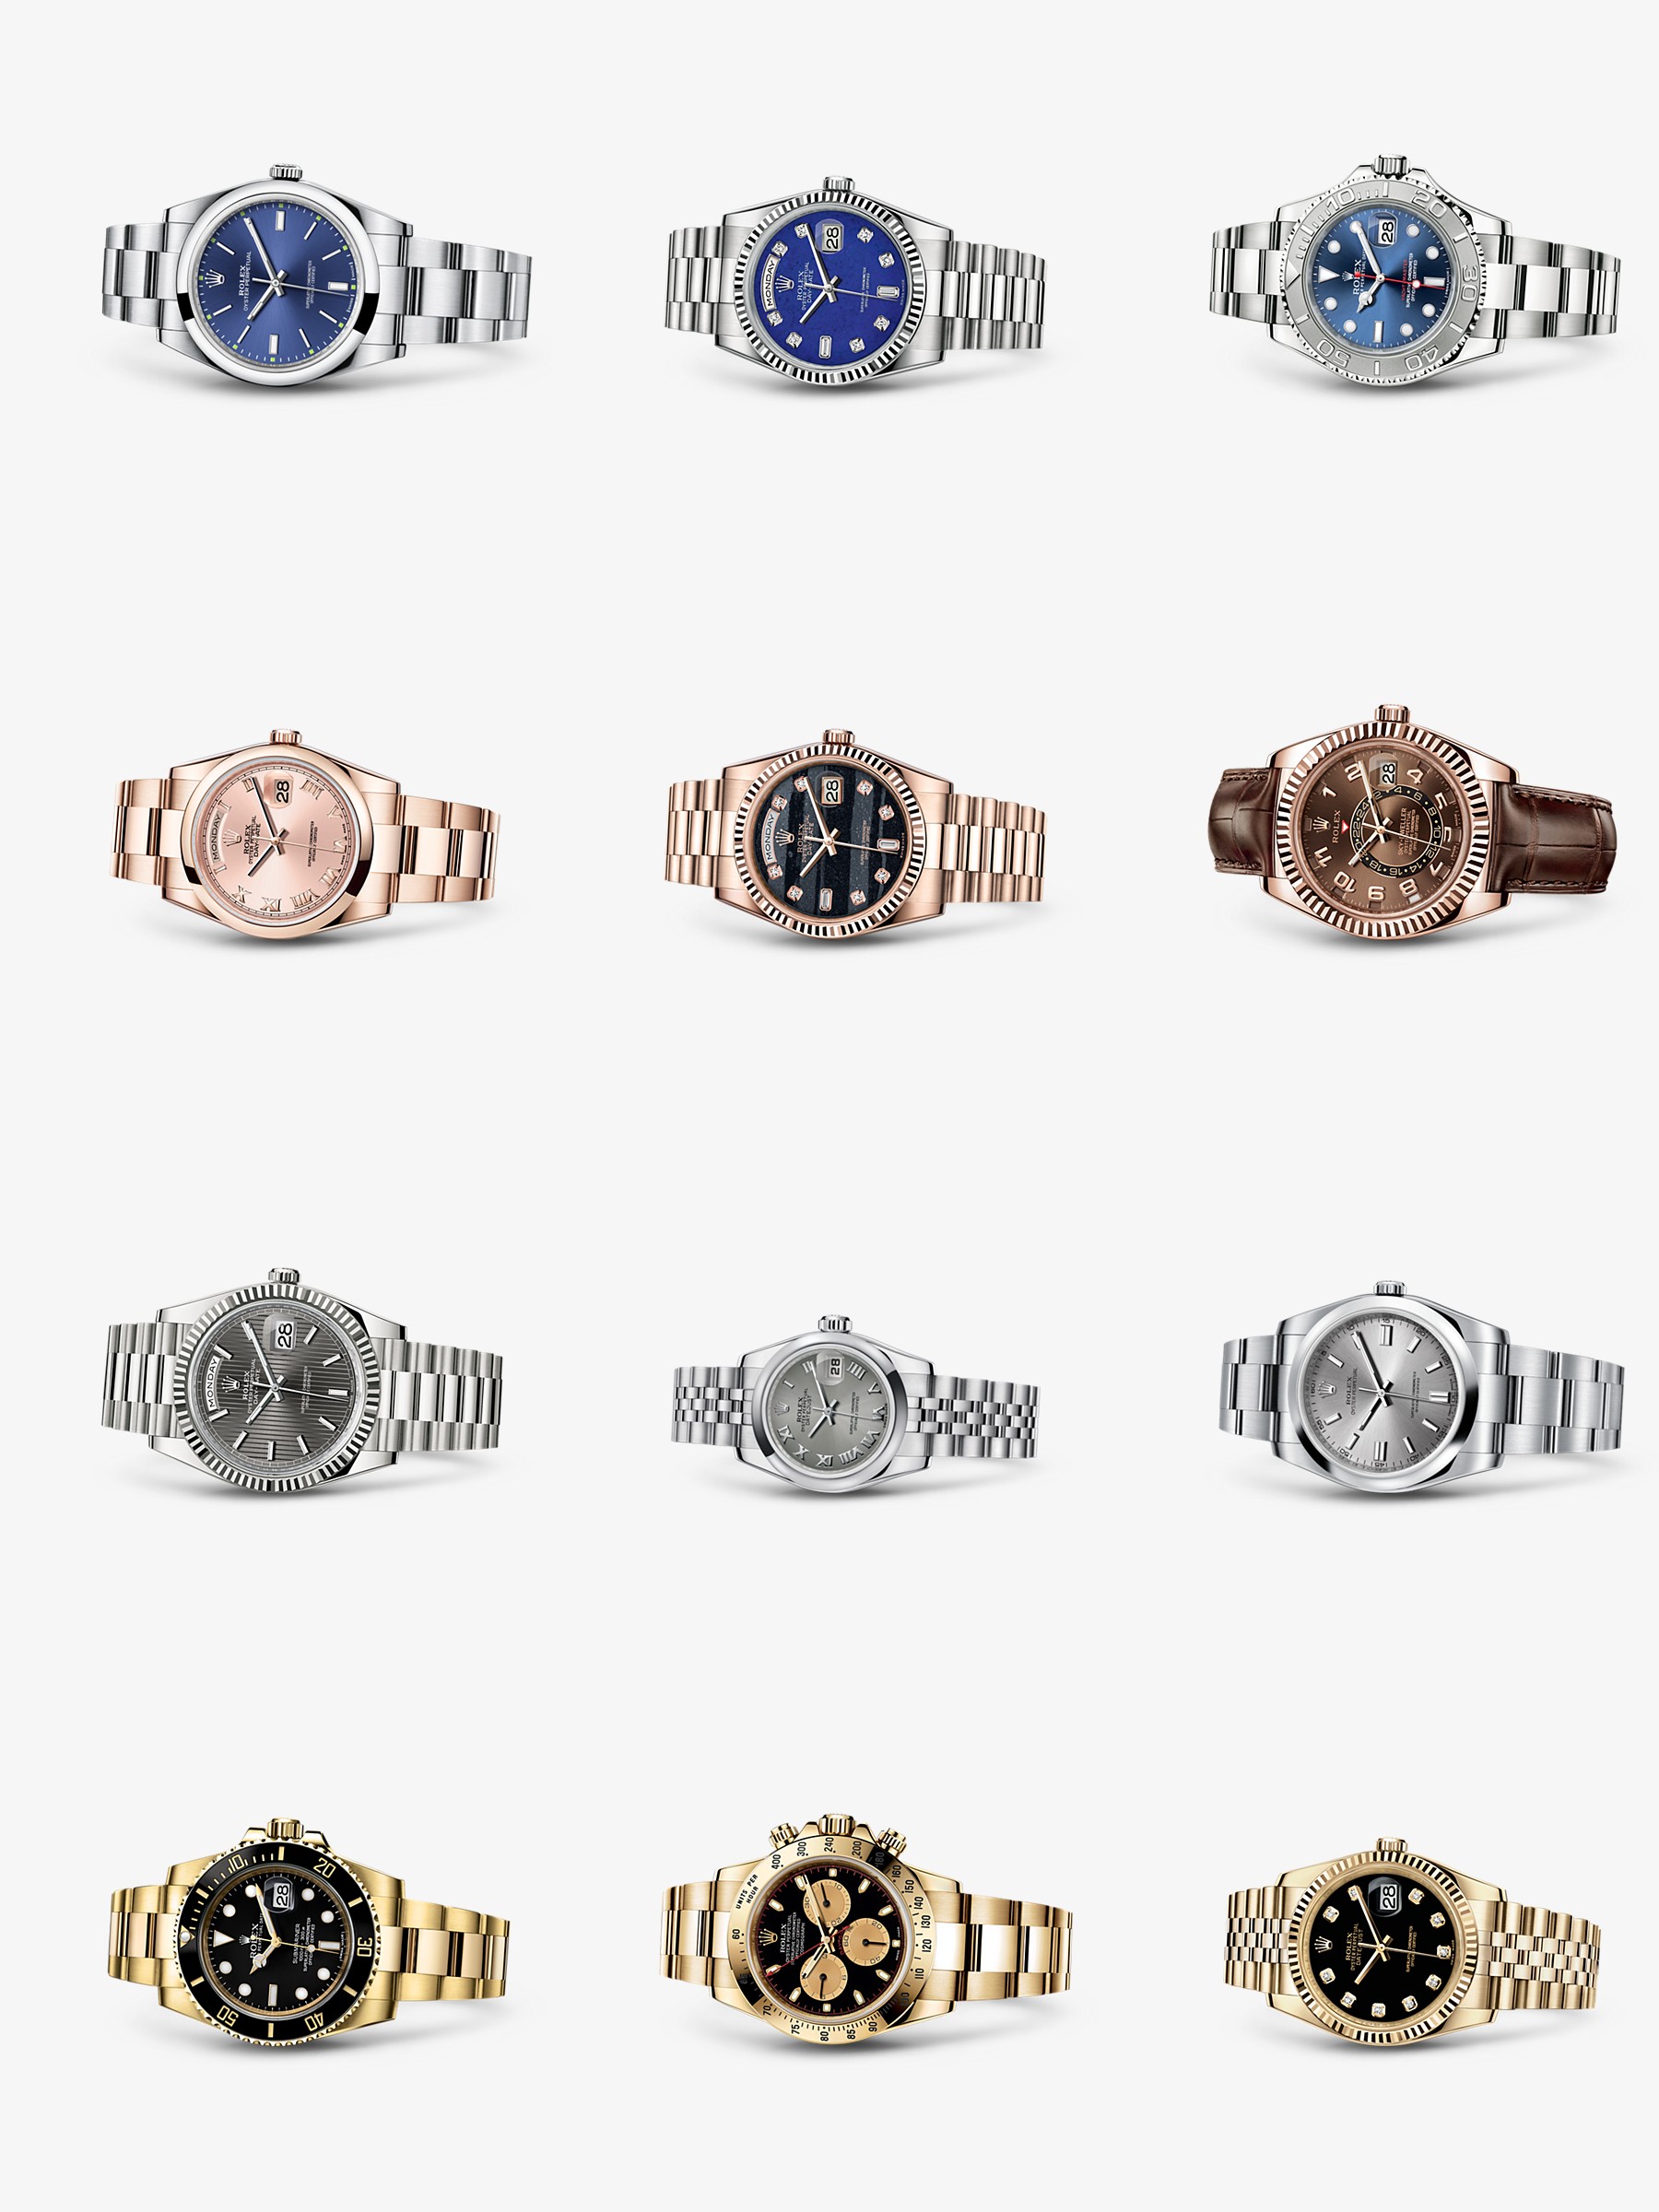 Rolex – current collection now on WatchBase including prices » WatchBase